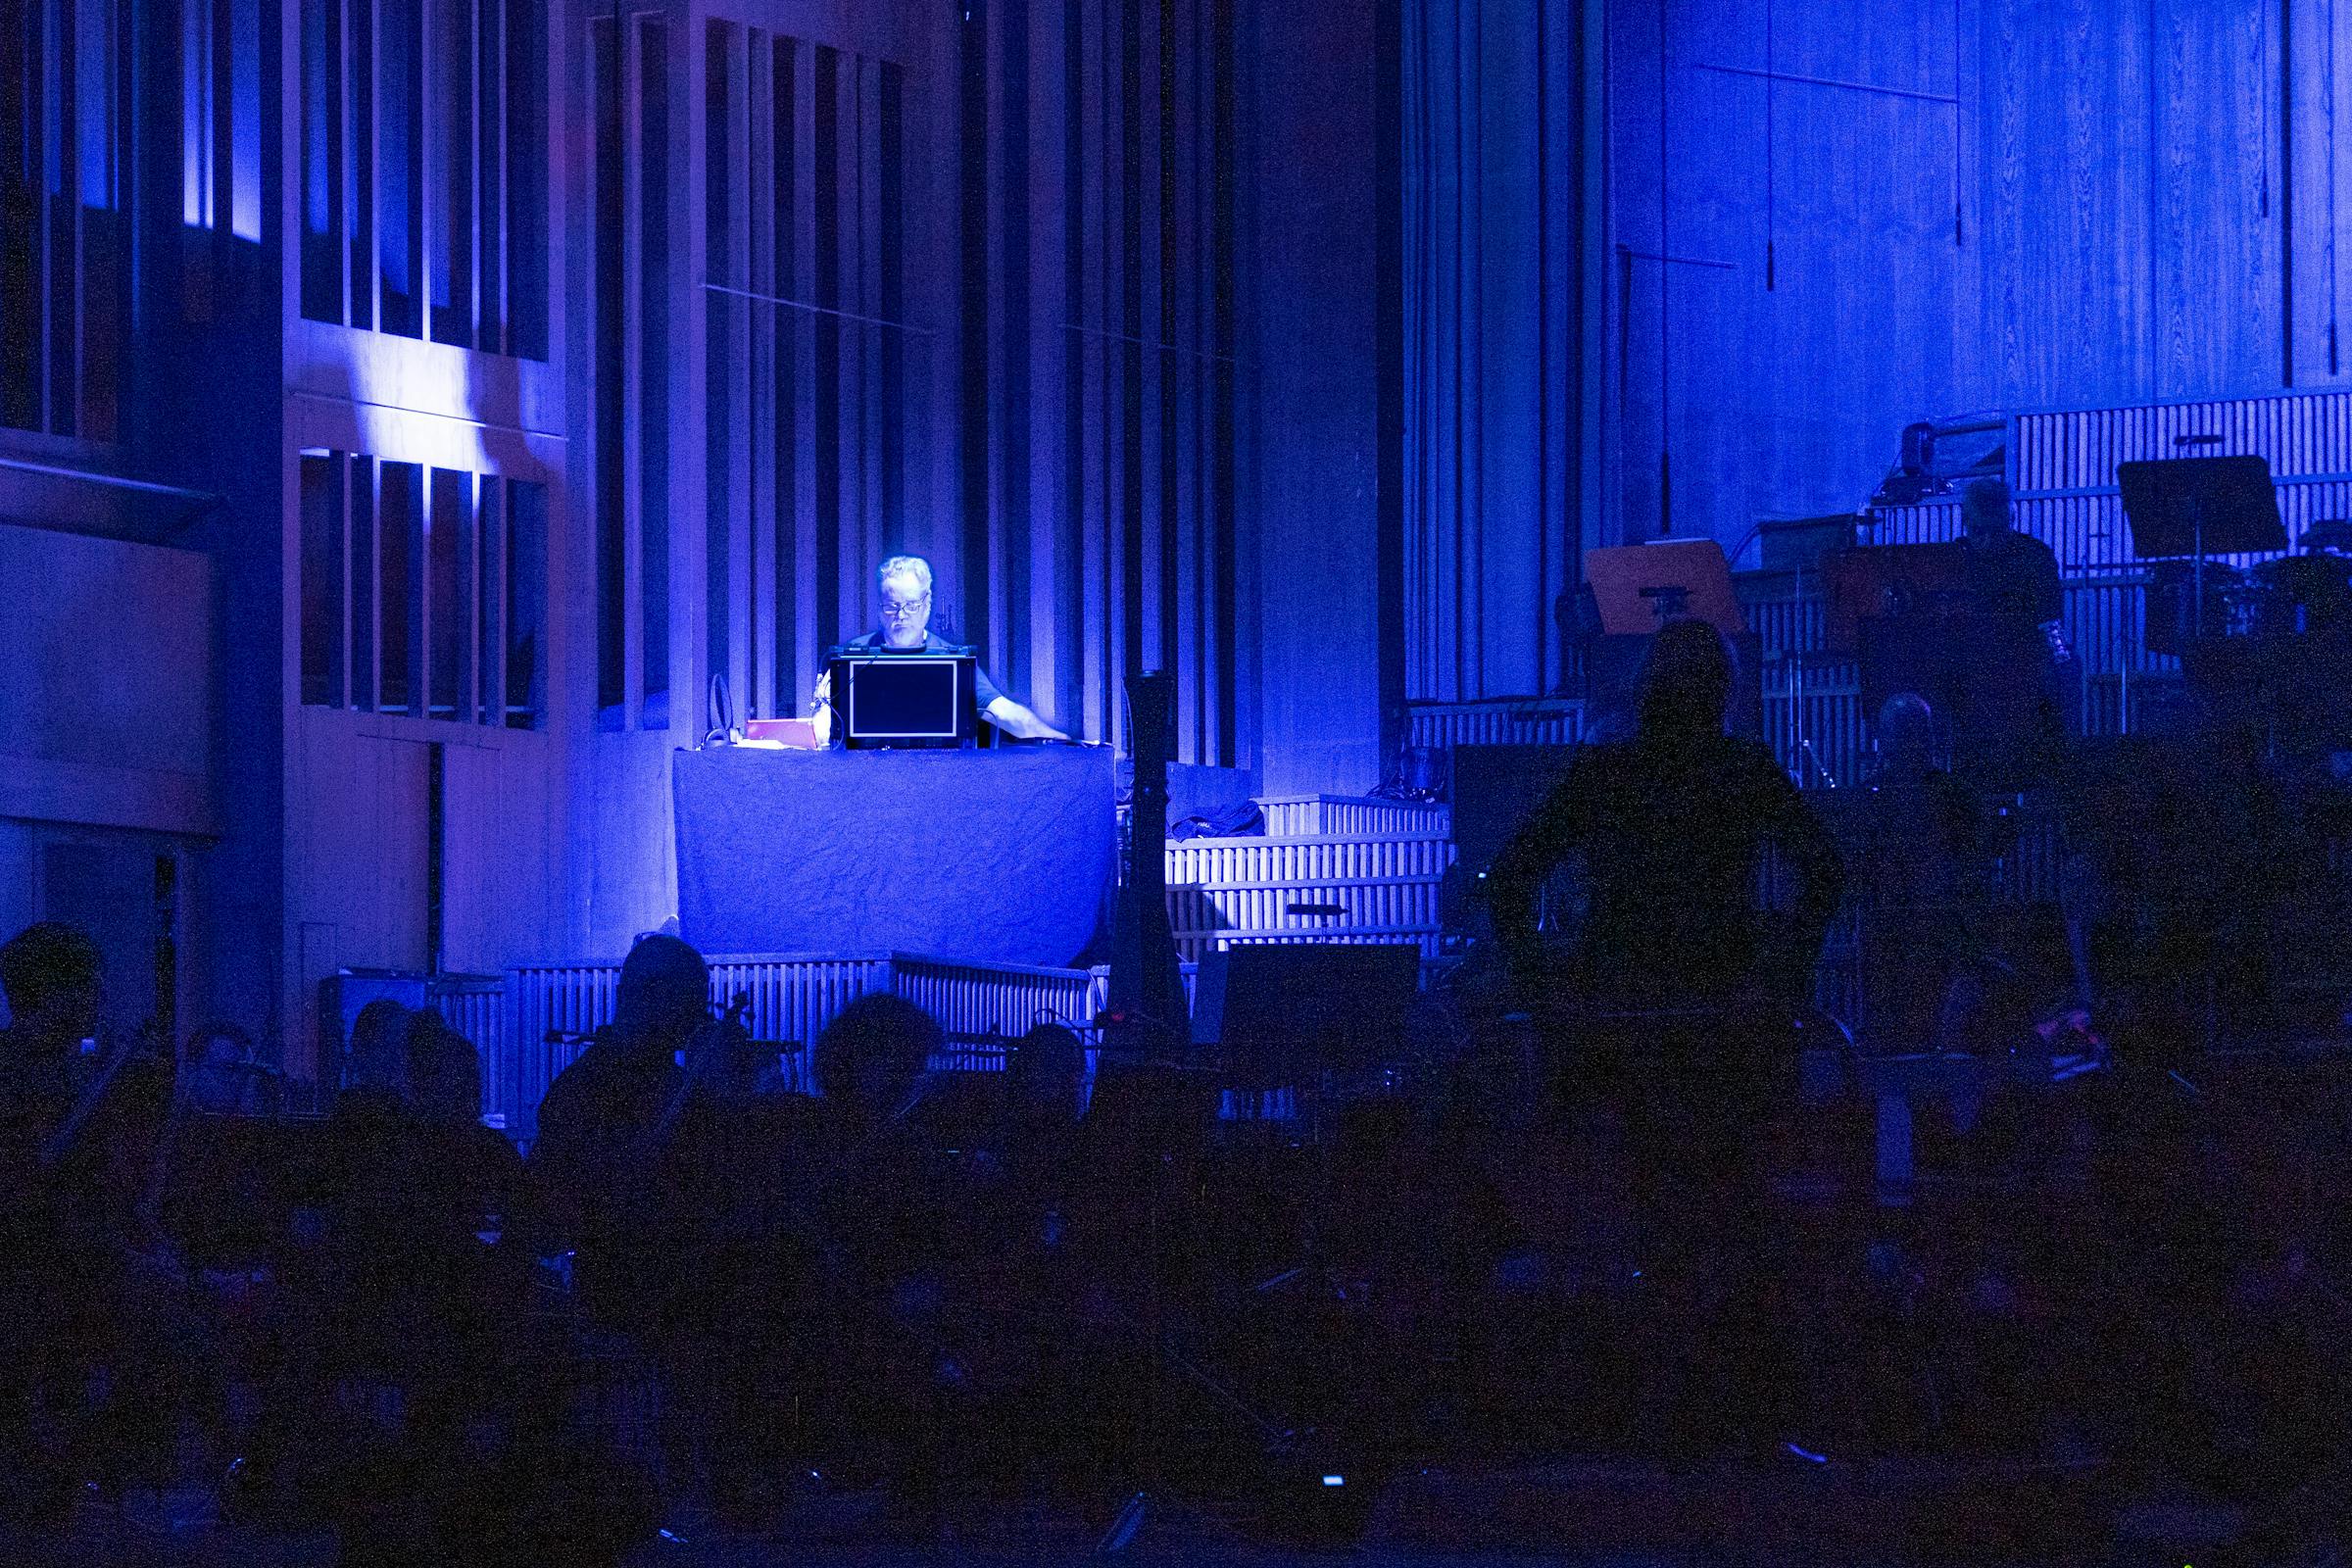 Man on stage plays modular synthesiser alongside an orchestra and under a spotlight 